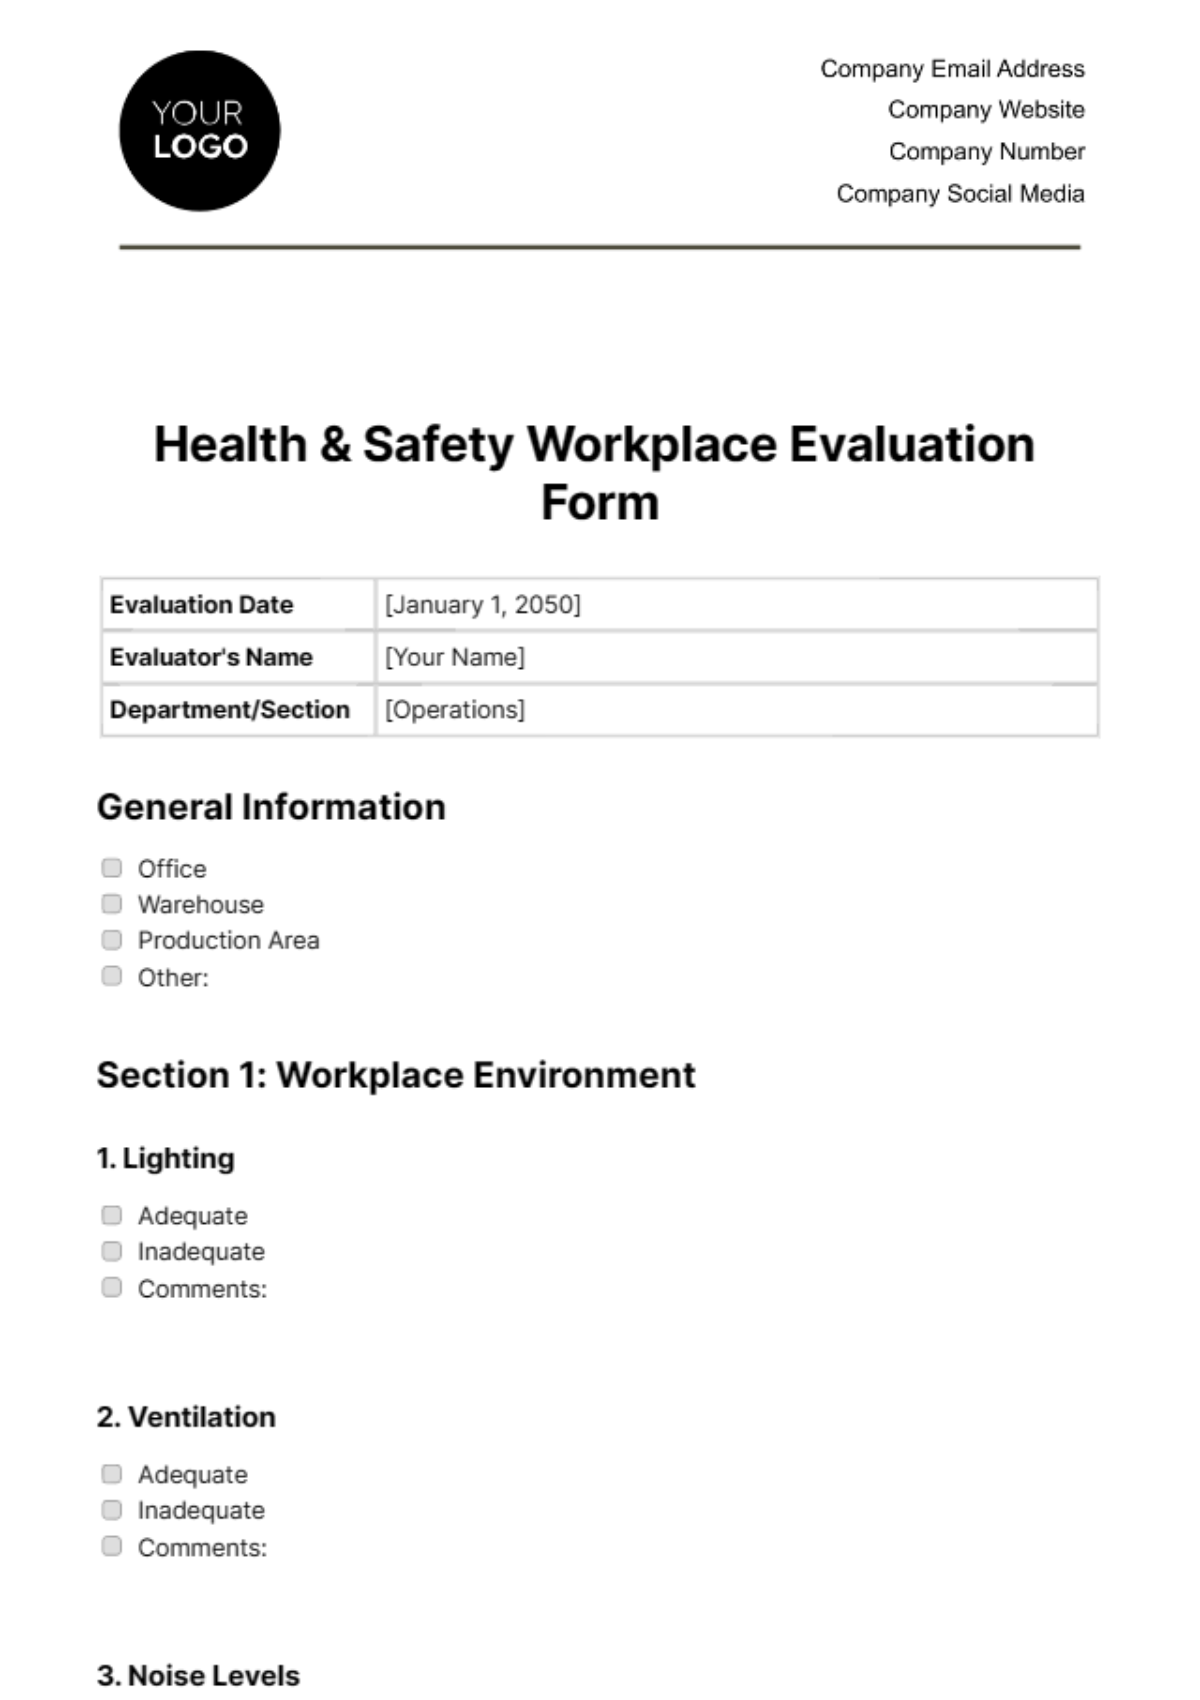 Health & Safety Workplace Evaluation Form Template